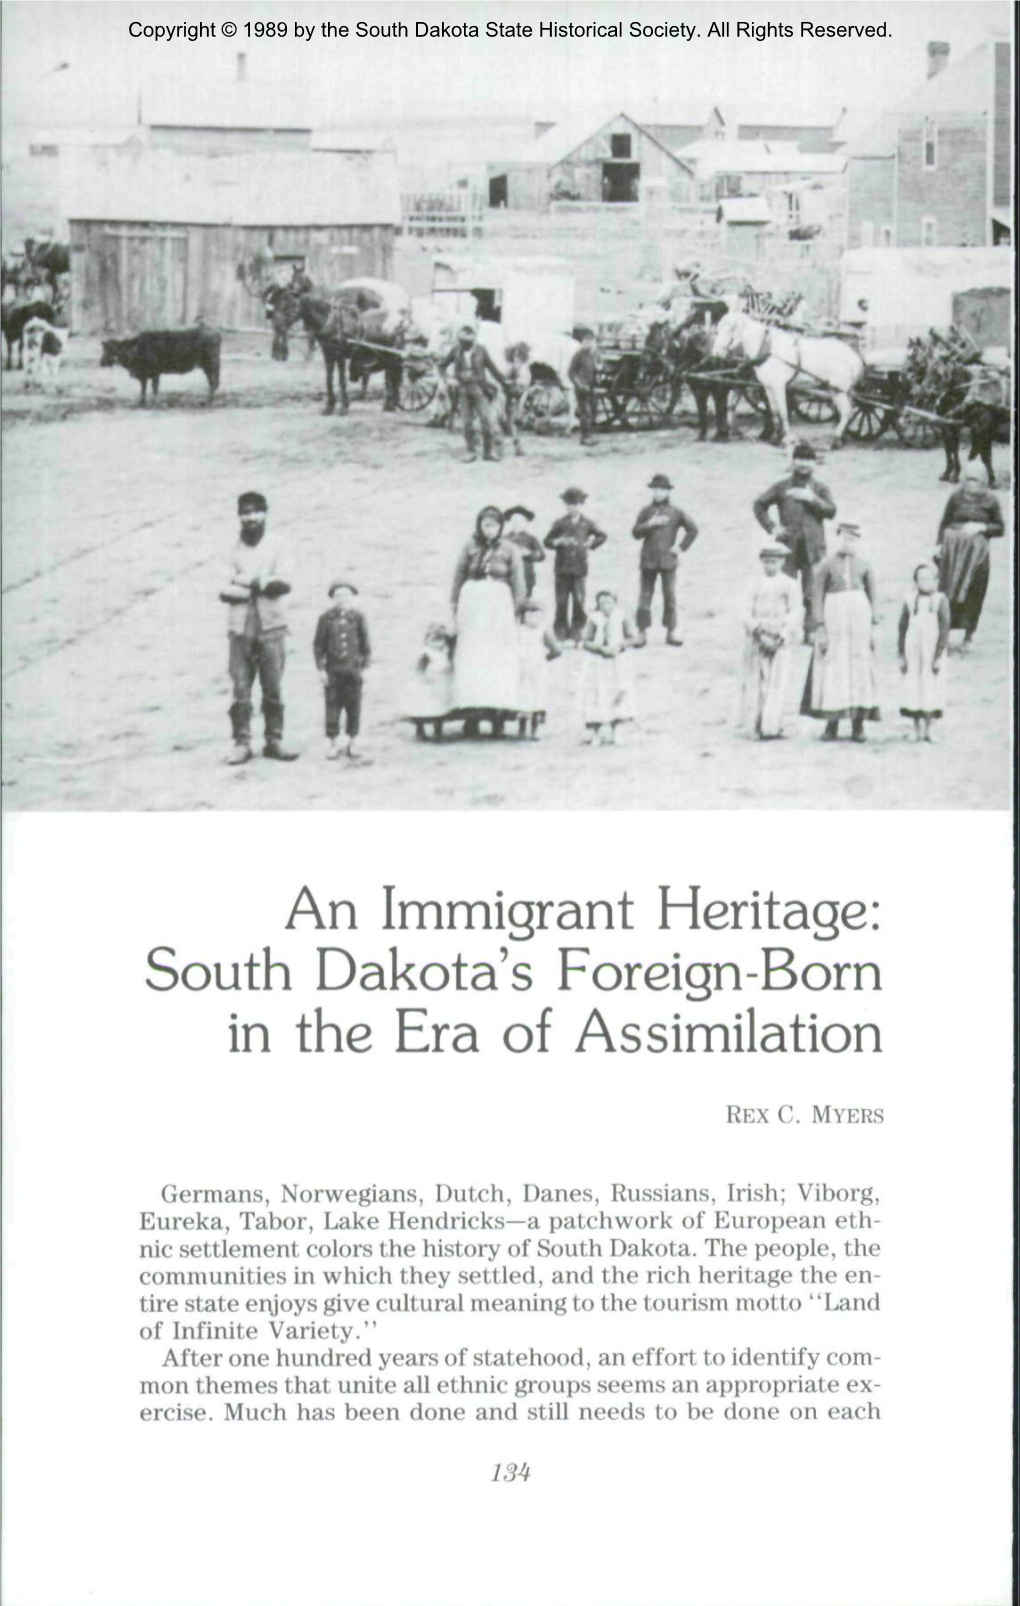 An Immigrant Heritage: South Dakota's Foreign-Born in the Era of Assimilation